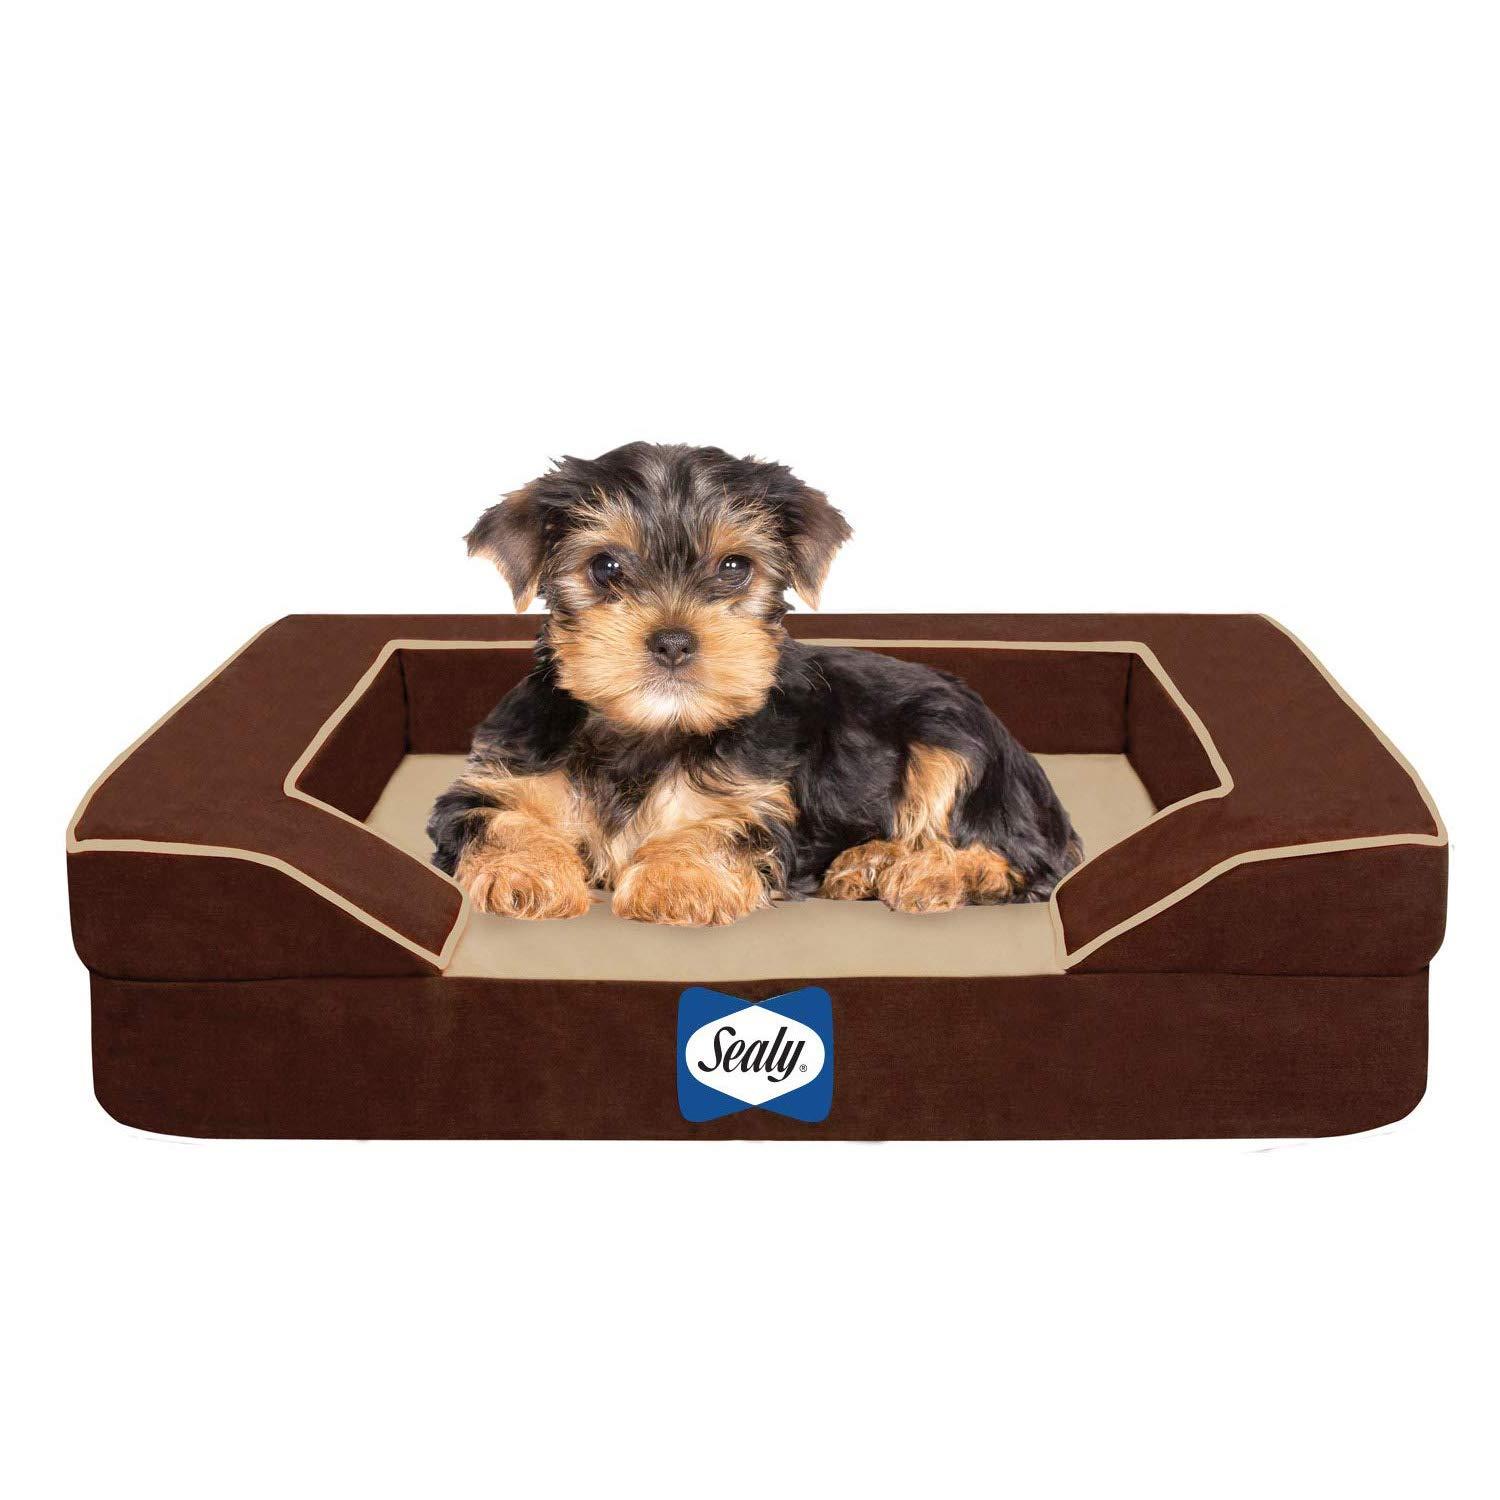 Sealy Dog Bed Lux Pet Dog Bed, Quad Layer Technology with Memory Foam, Orthopedic Foam, and Cooling Energy Gel. Machine Washable Cover. Small, Autumn Brown